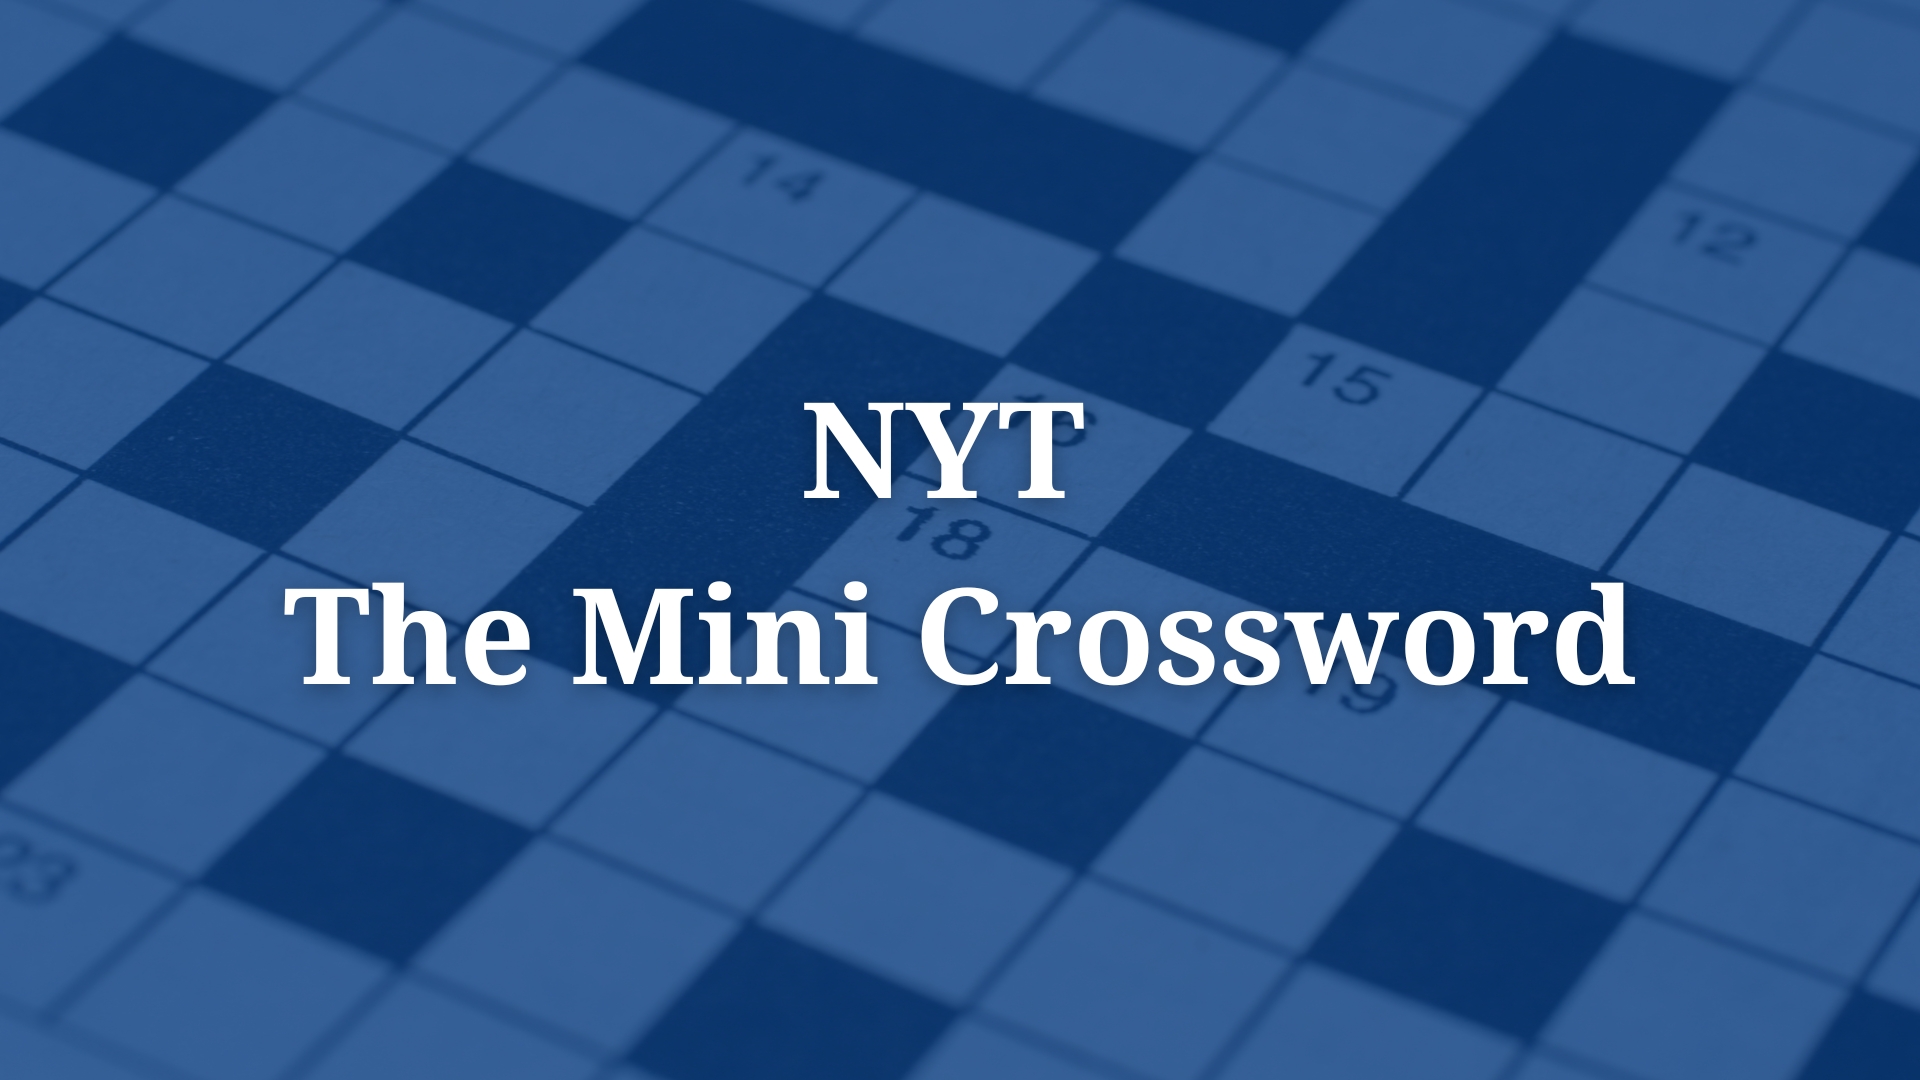 quot Less than hardly quot the NYT Crossword Clue Answer and Hints